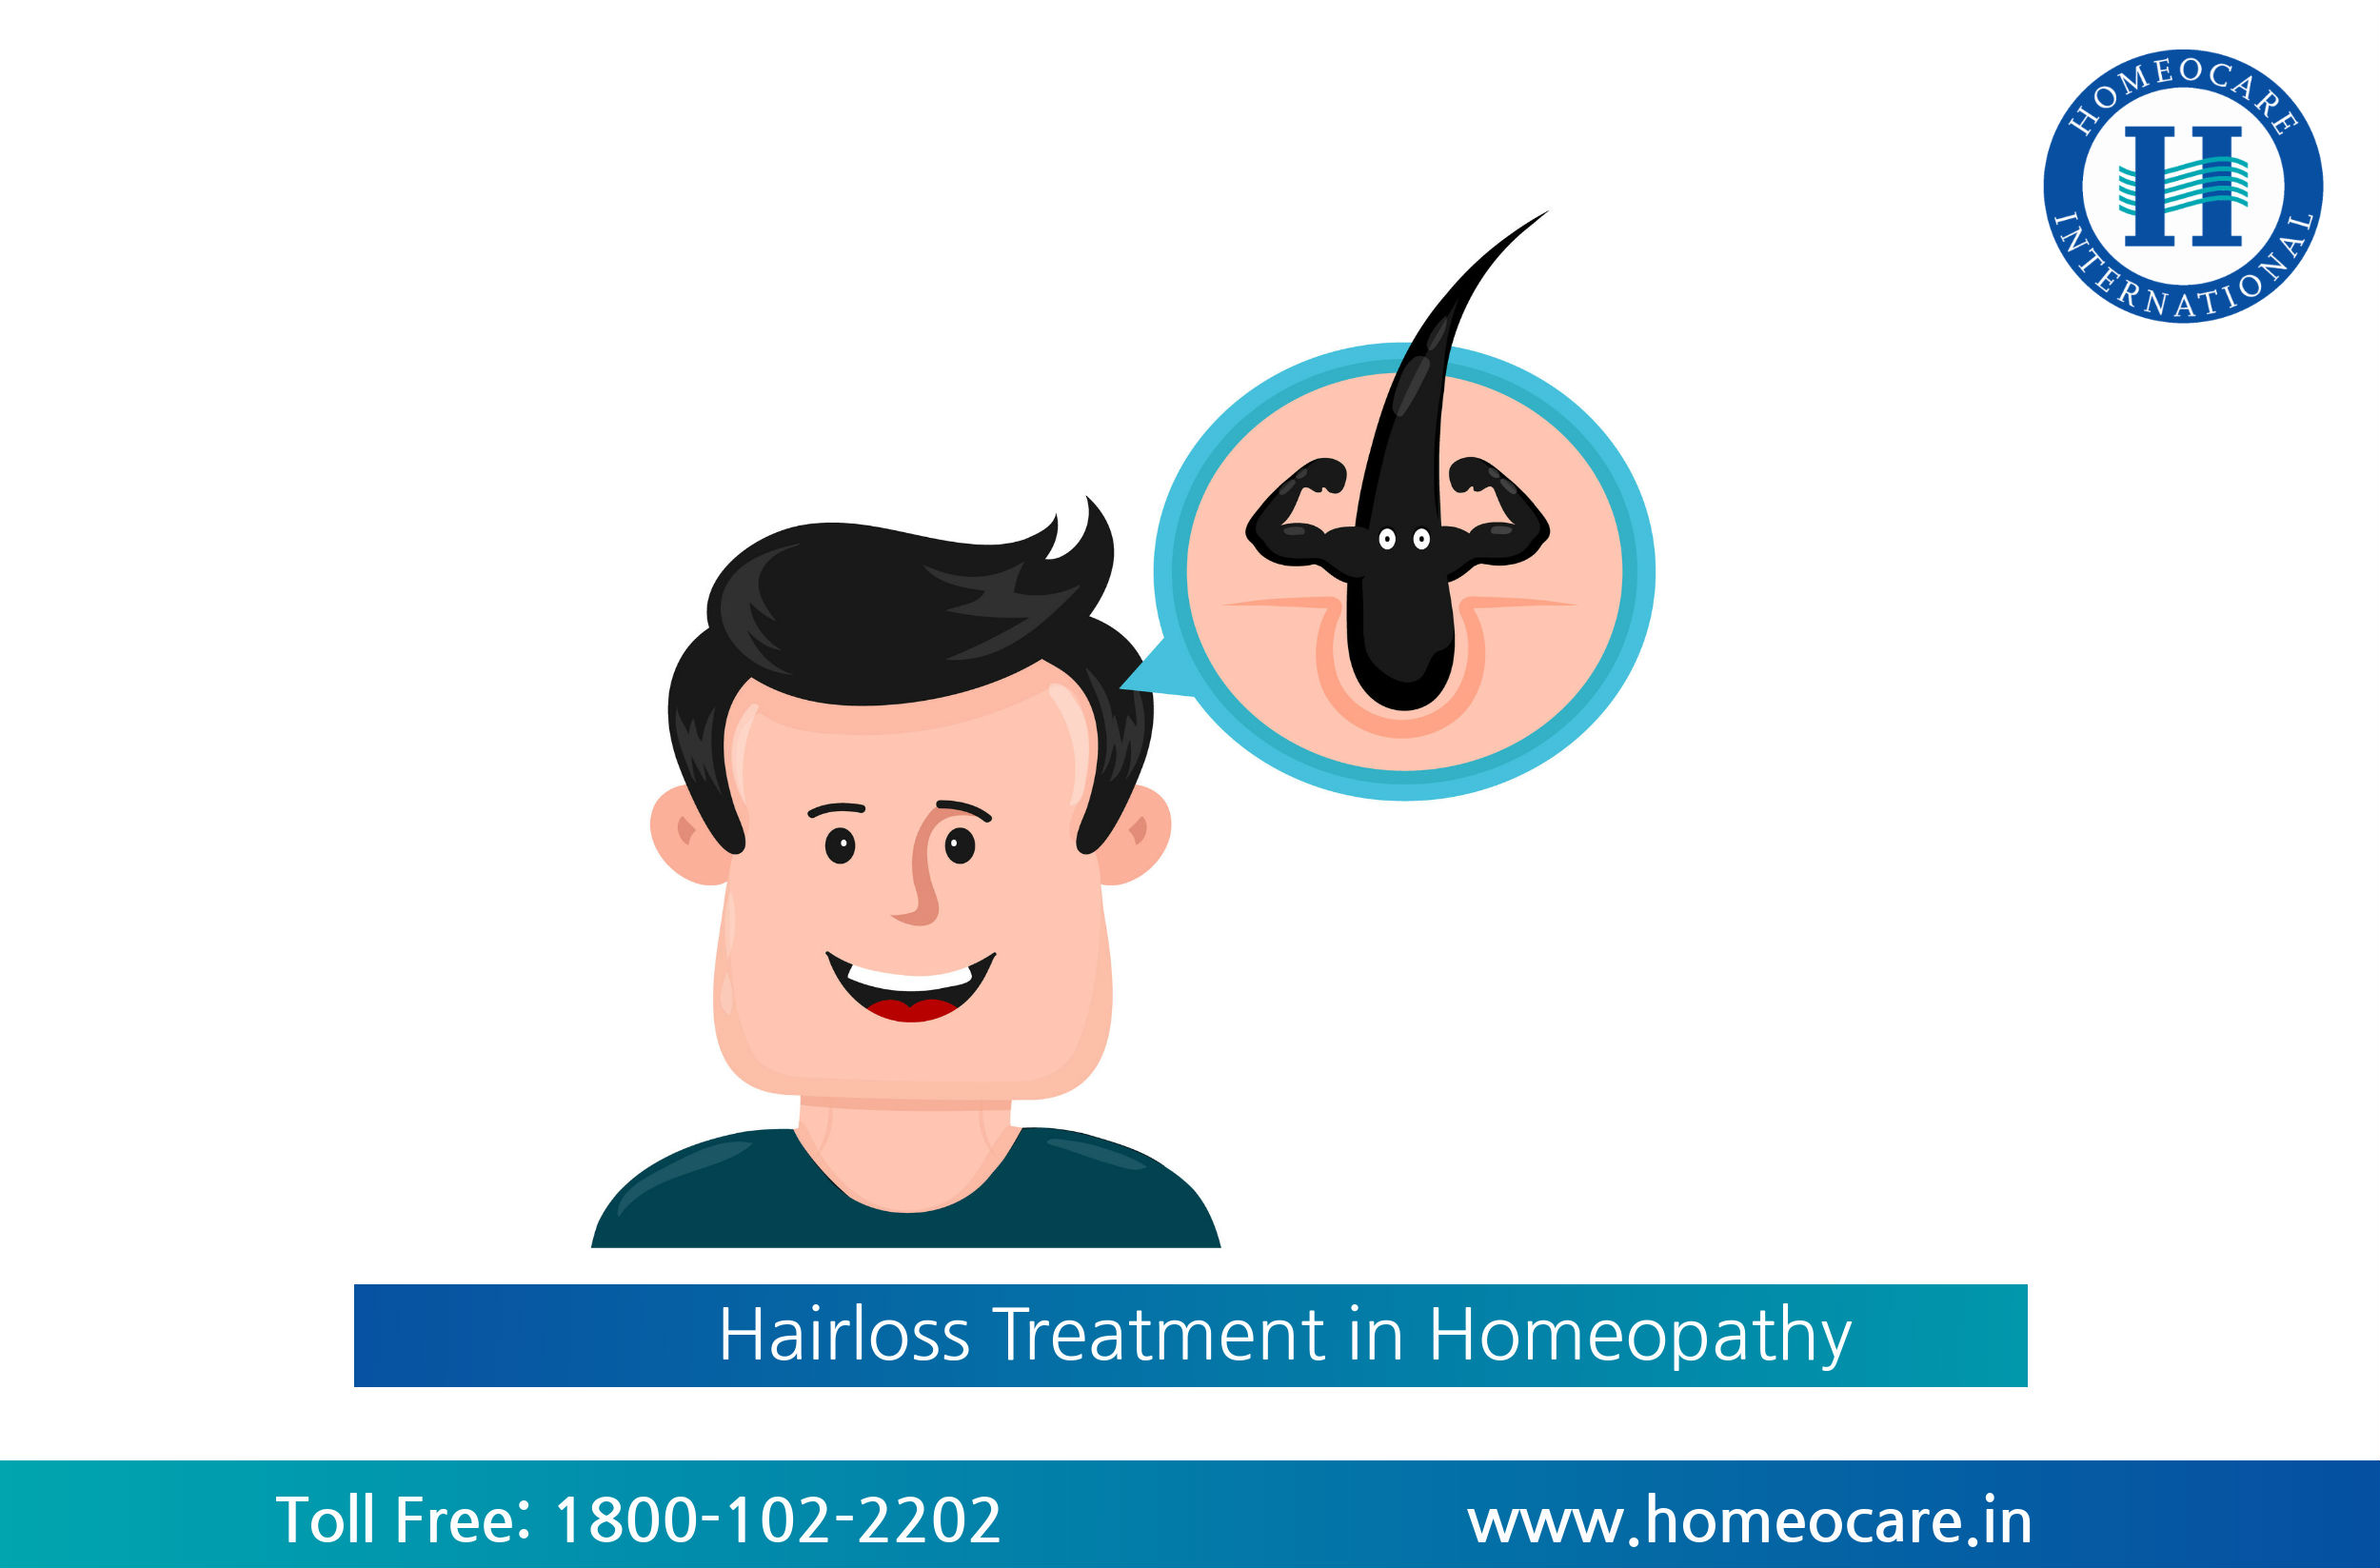 Hairloss Treatment in Homeopathy